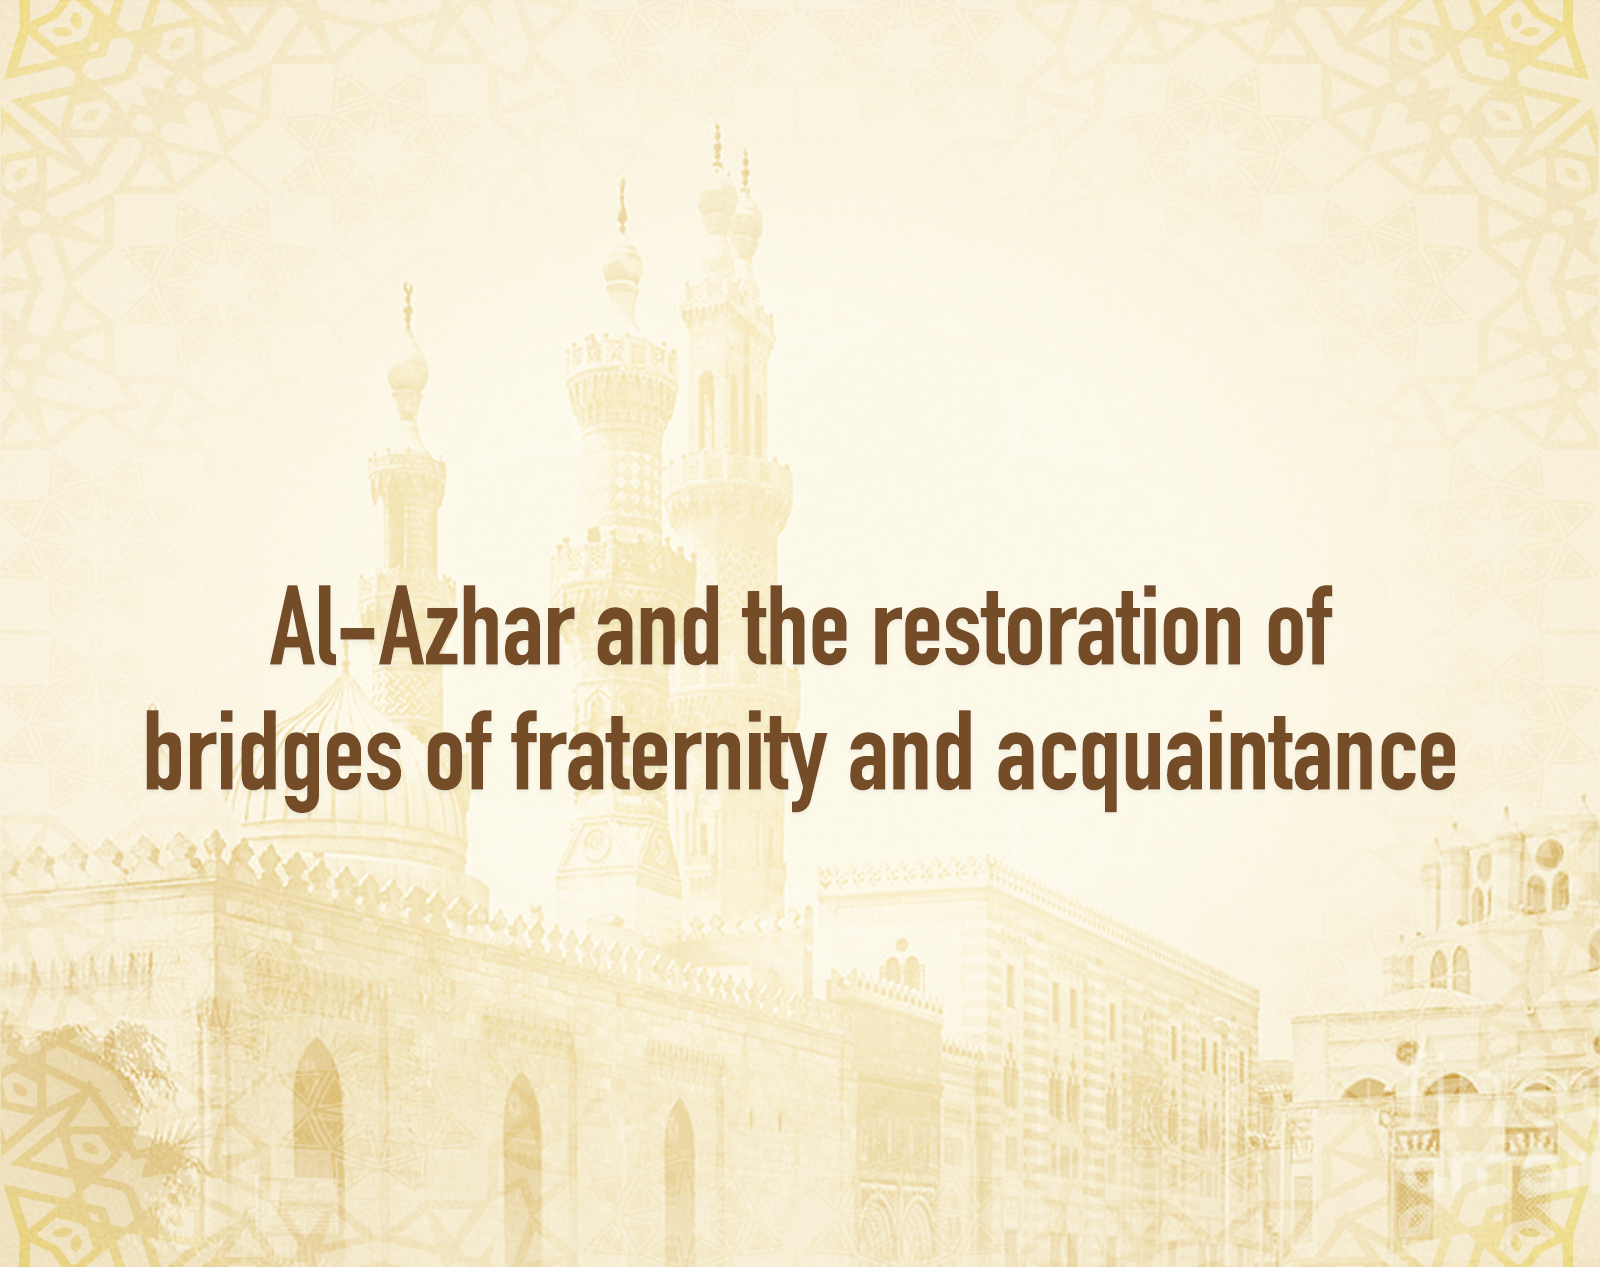 Al-Azhar and the restoration of bridges of fraternity and acquaintance.png